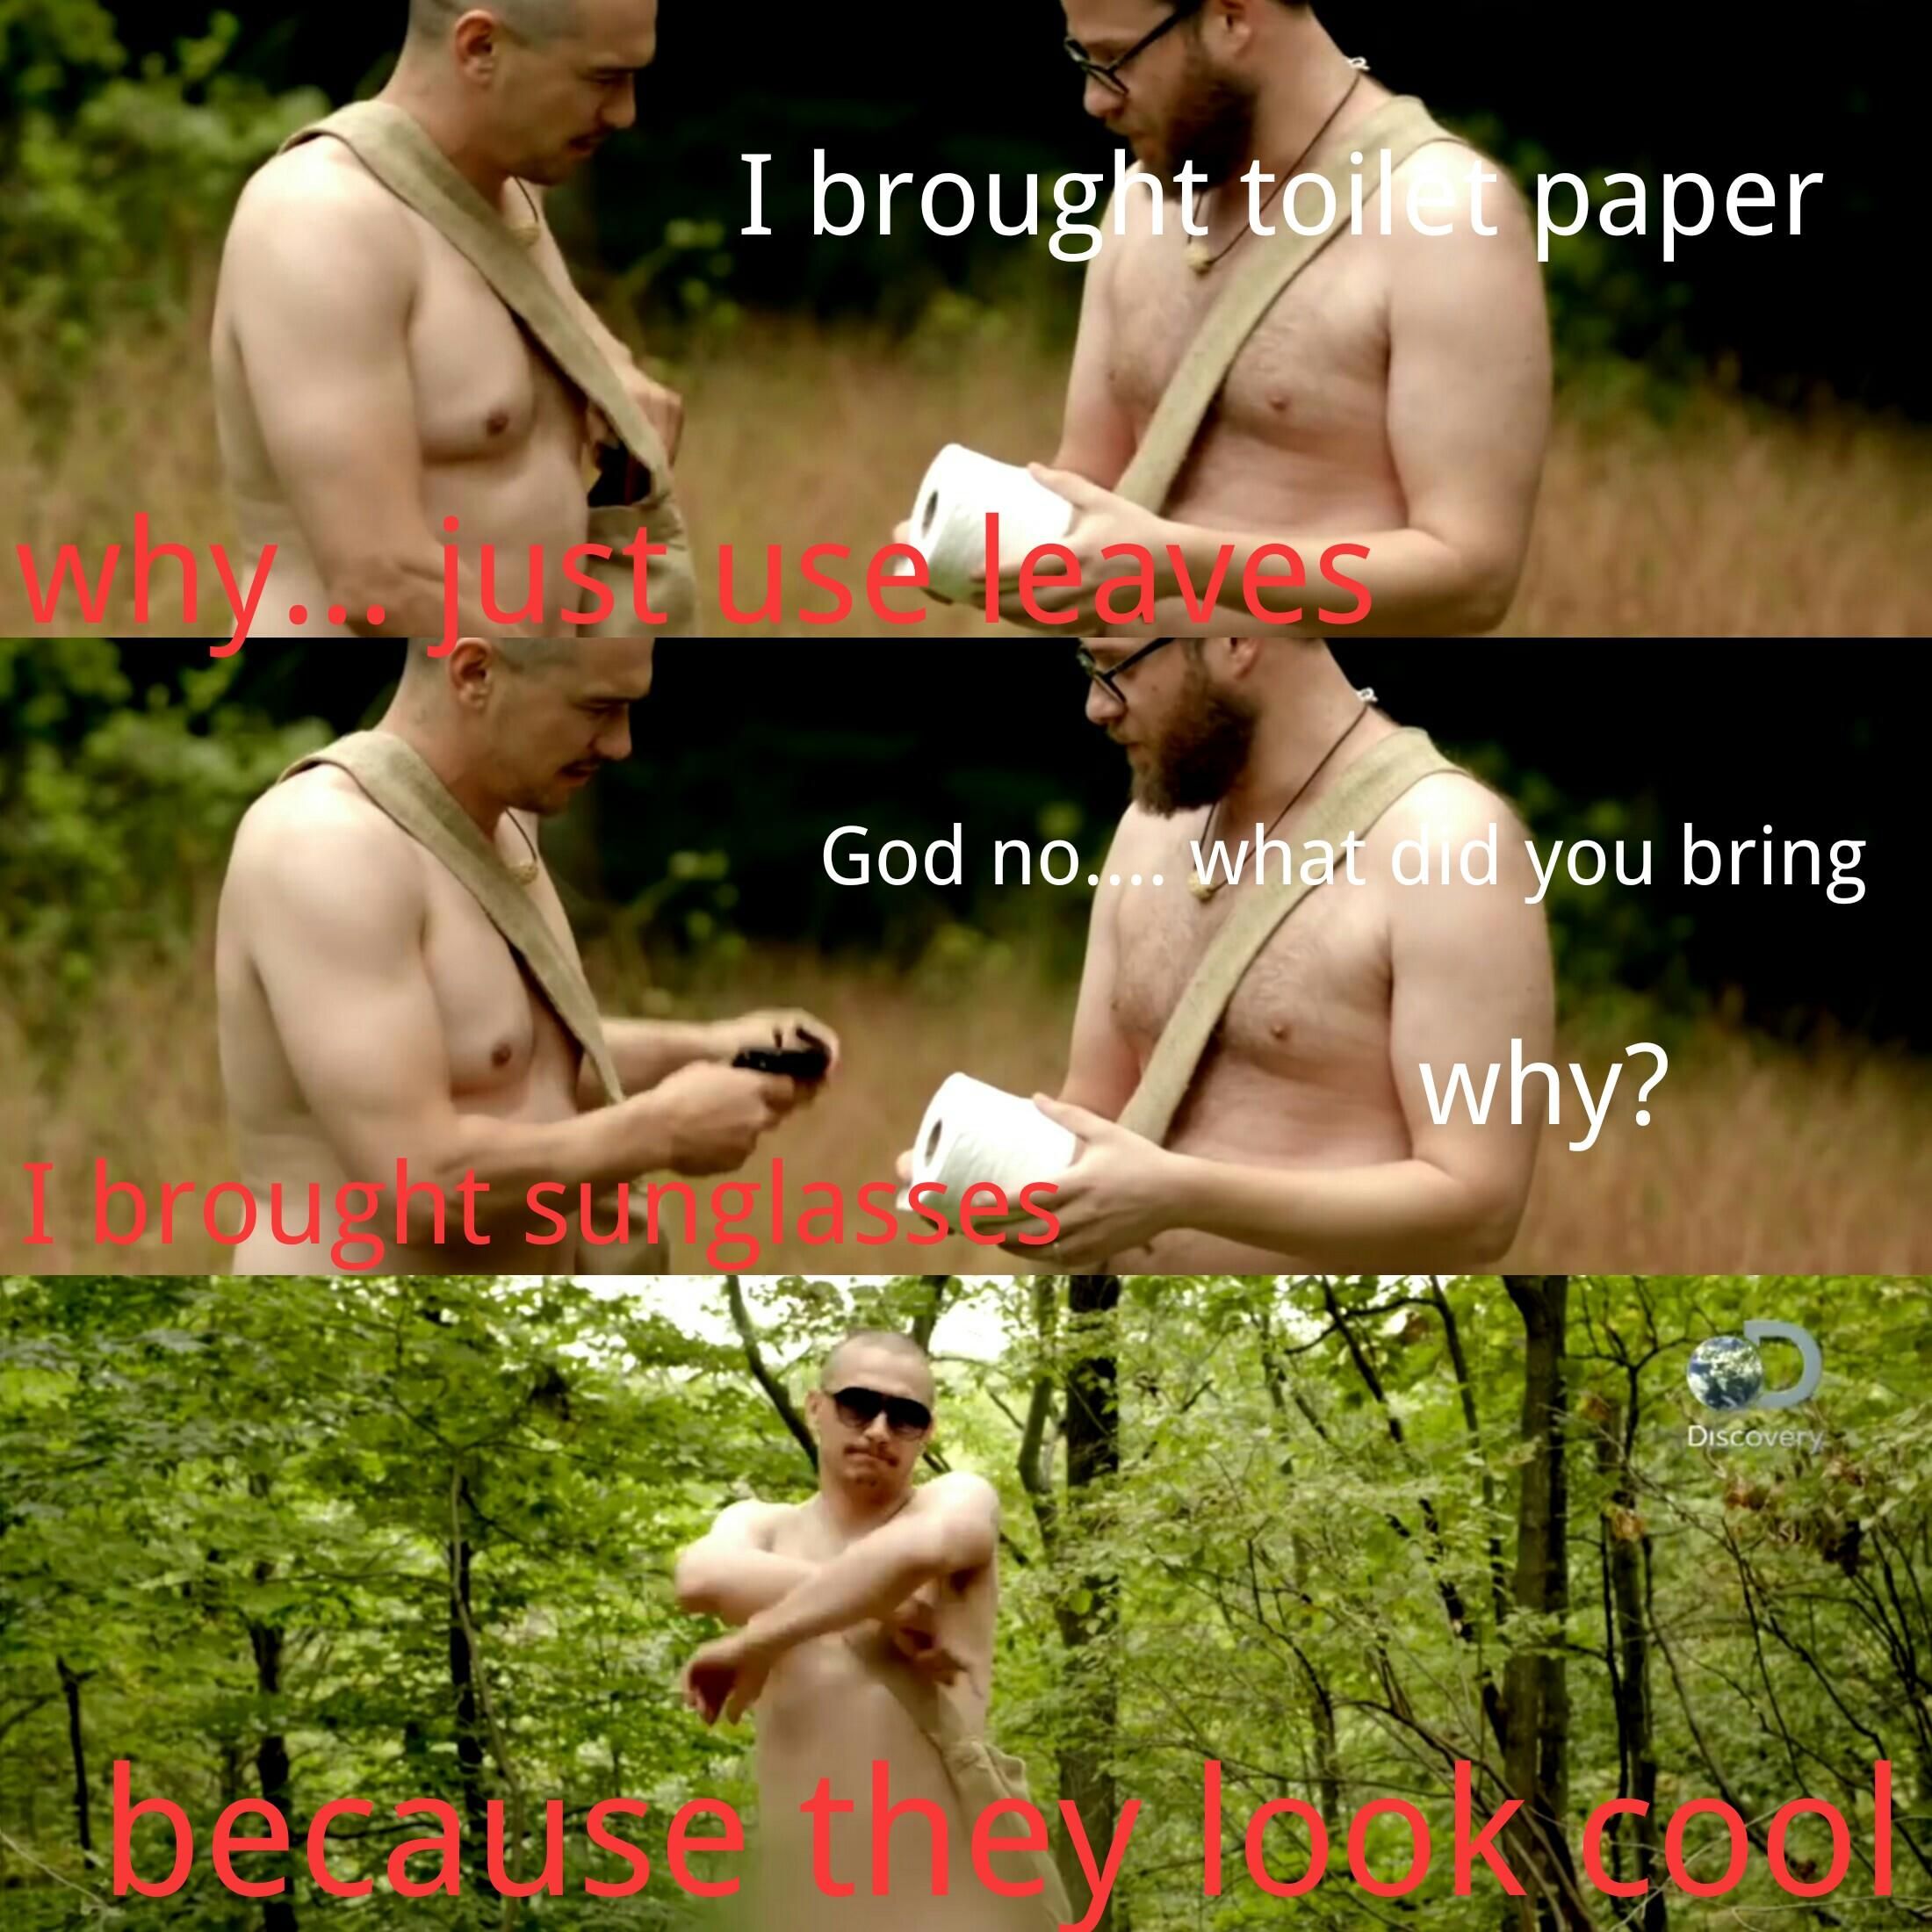 That time James Franco and Seth Rogan went on naked and afraid